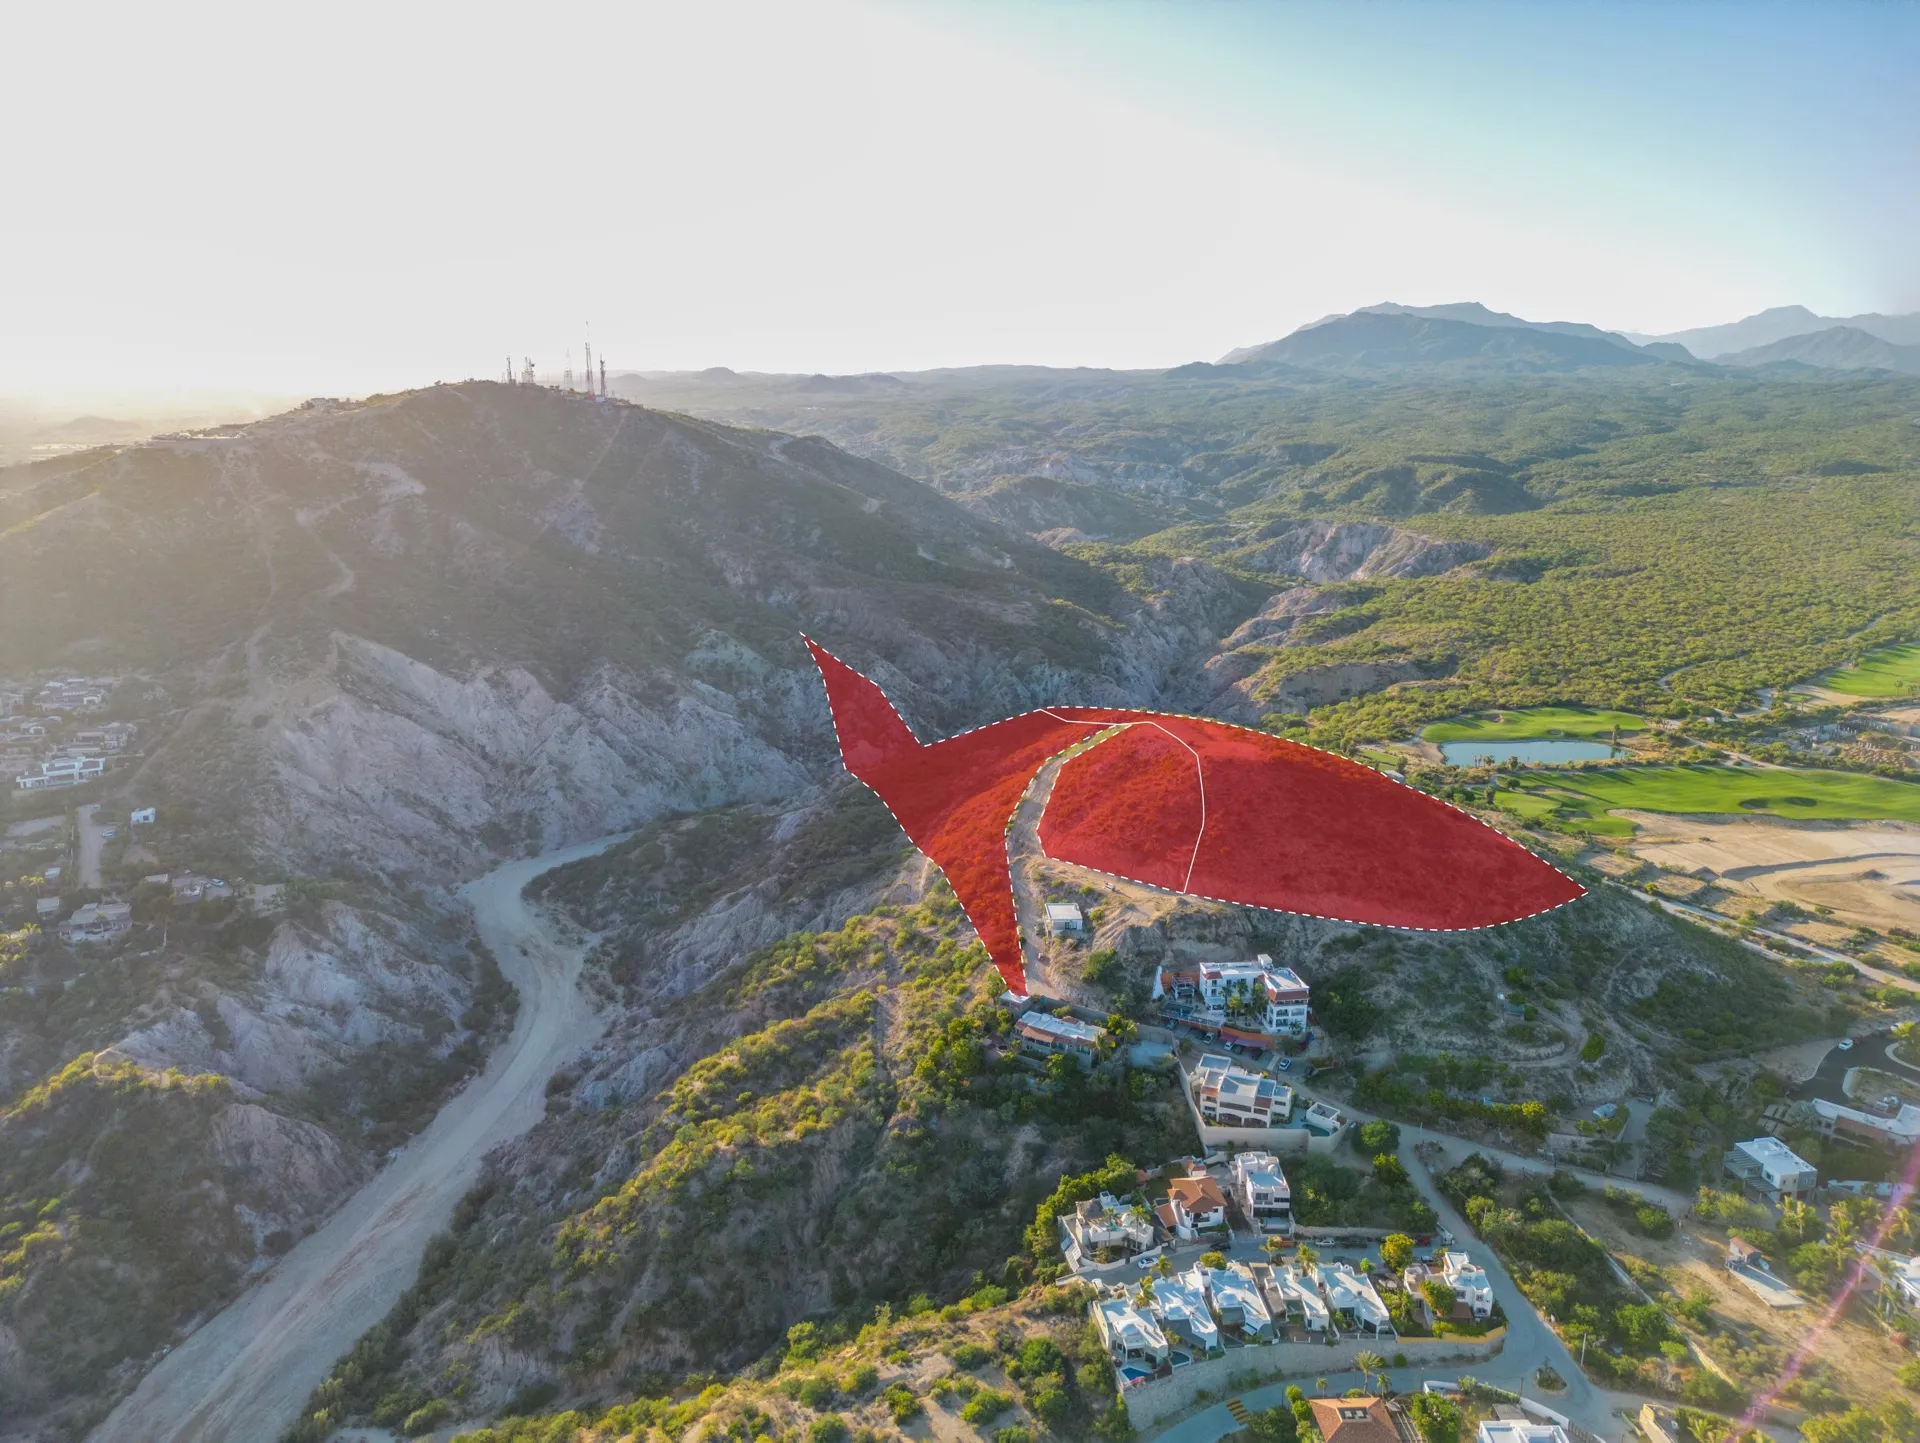 Undeniably one of the finest development parcels left in San Jose del Cabo, Montecito offers an elevated 55,414 square meters of jetliner views.